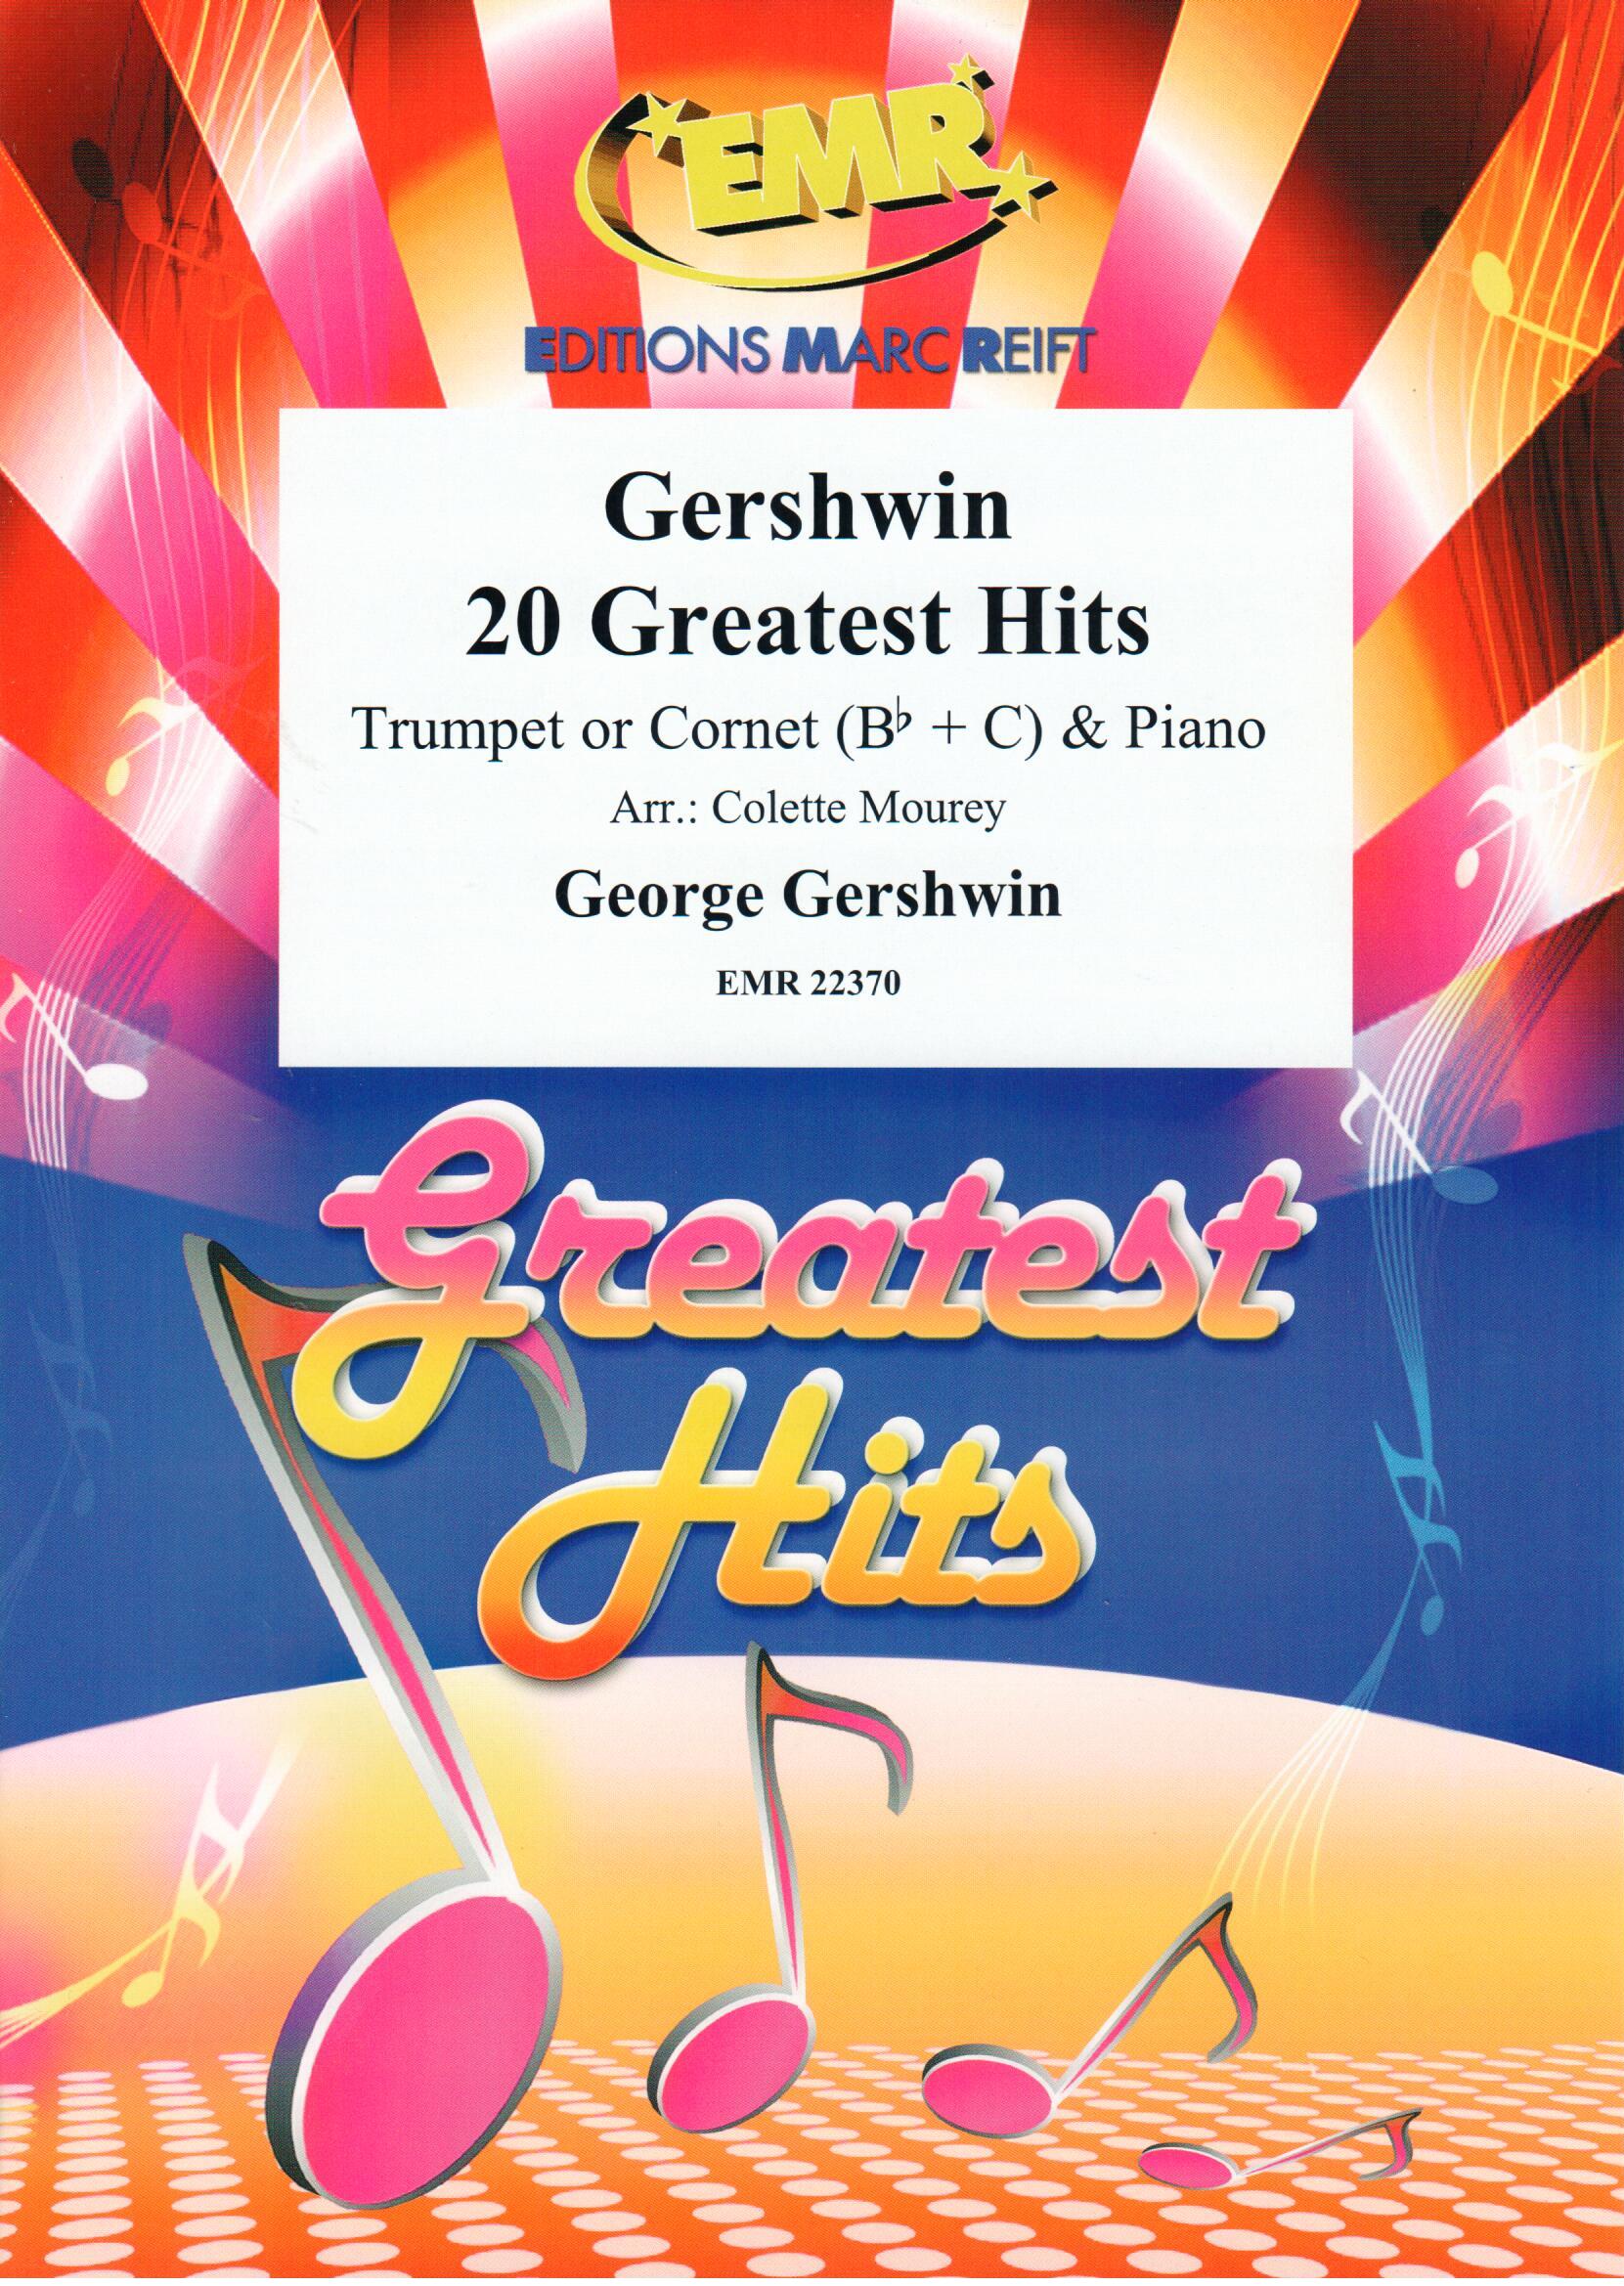 GERSHWIN 20 GREATEST HITS, SOLOS - B♭. Cornet/Trumpet with Piano